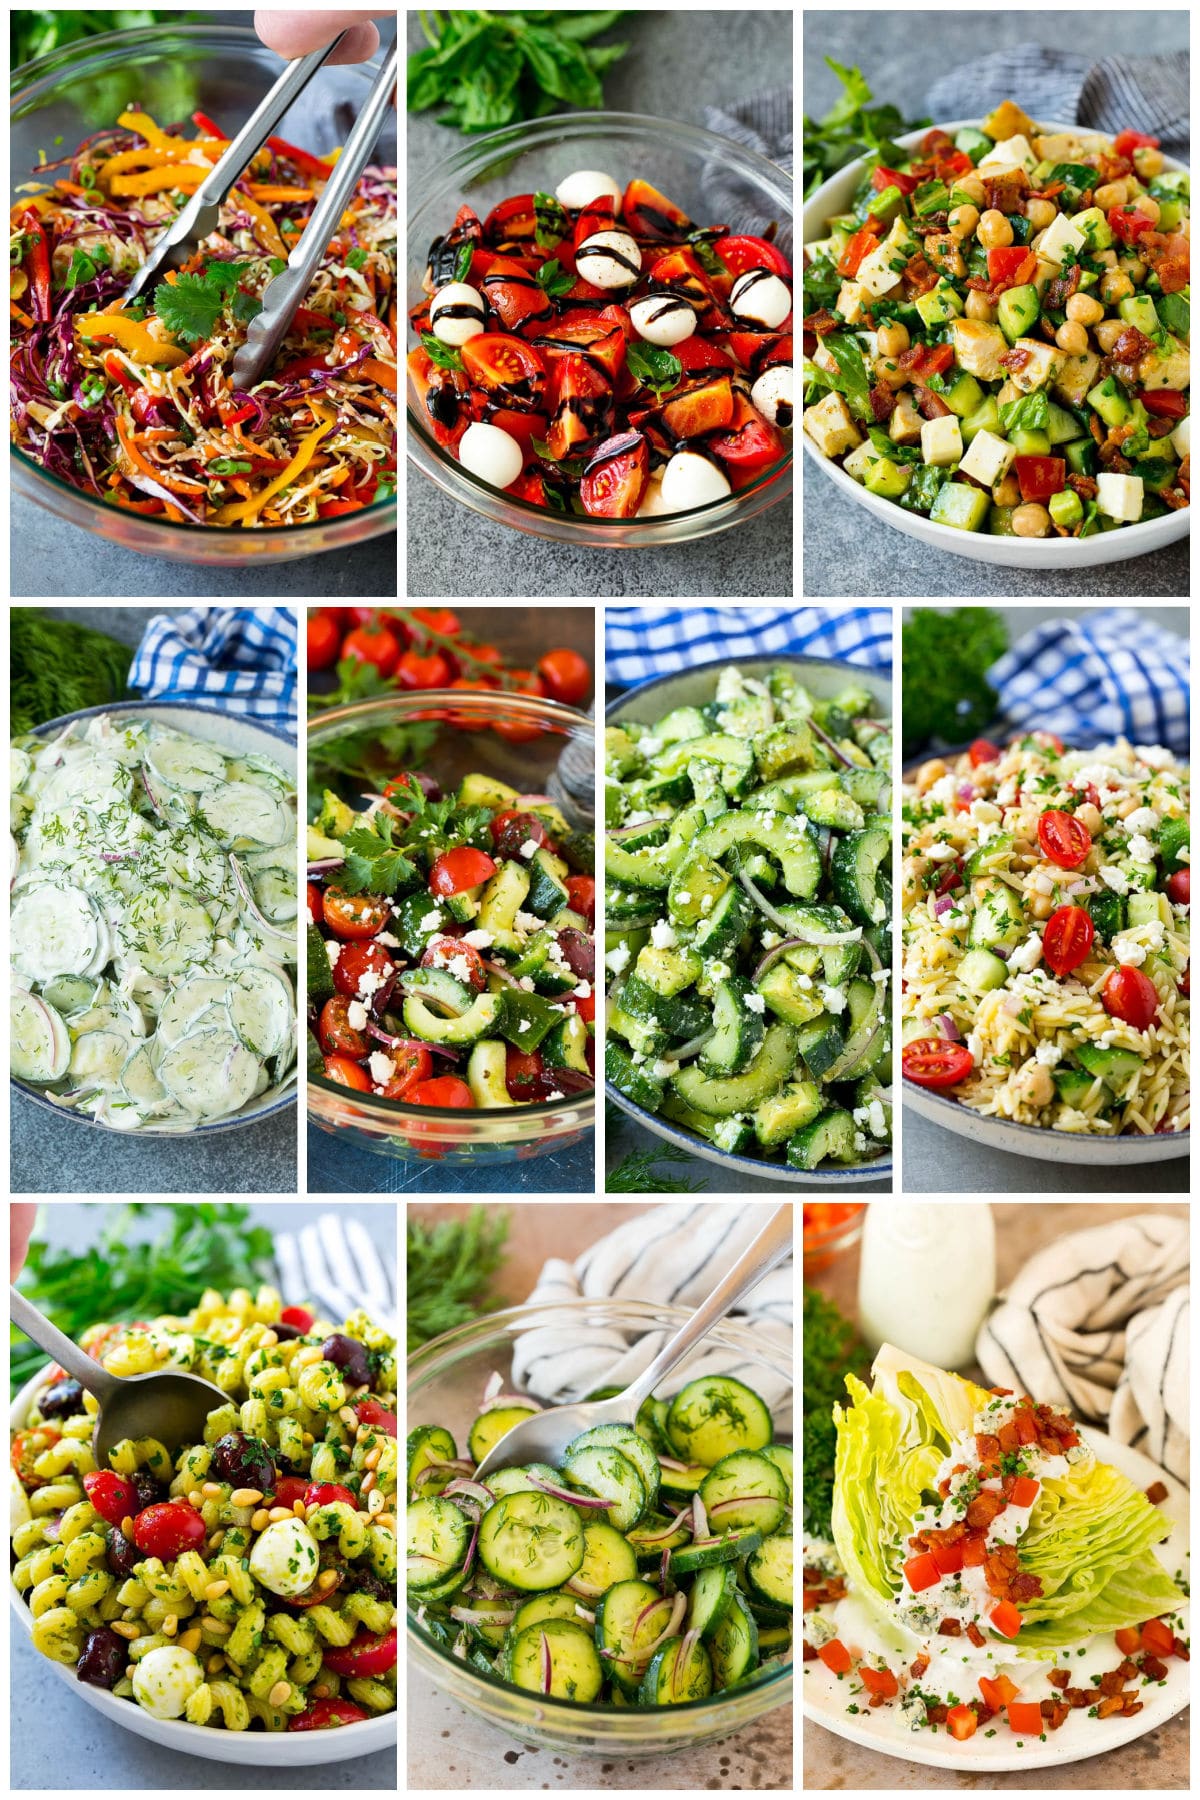 A group of summer salad recipes including favorites like a wedge salad, creamy cucumber salad and pesto pasta salad.